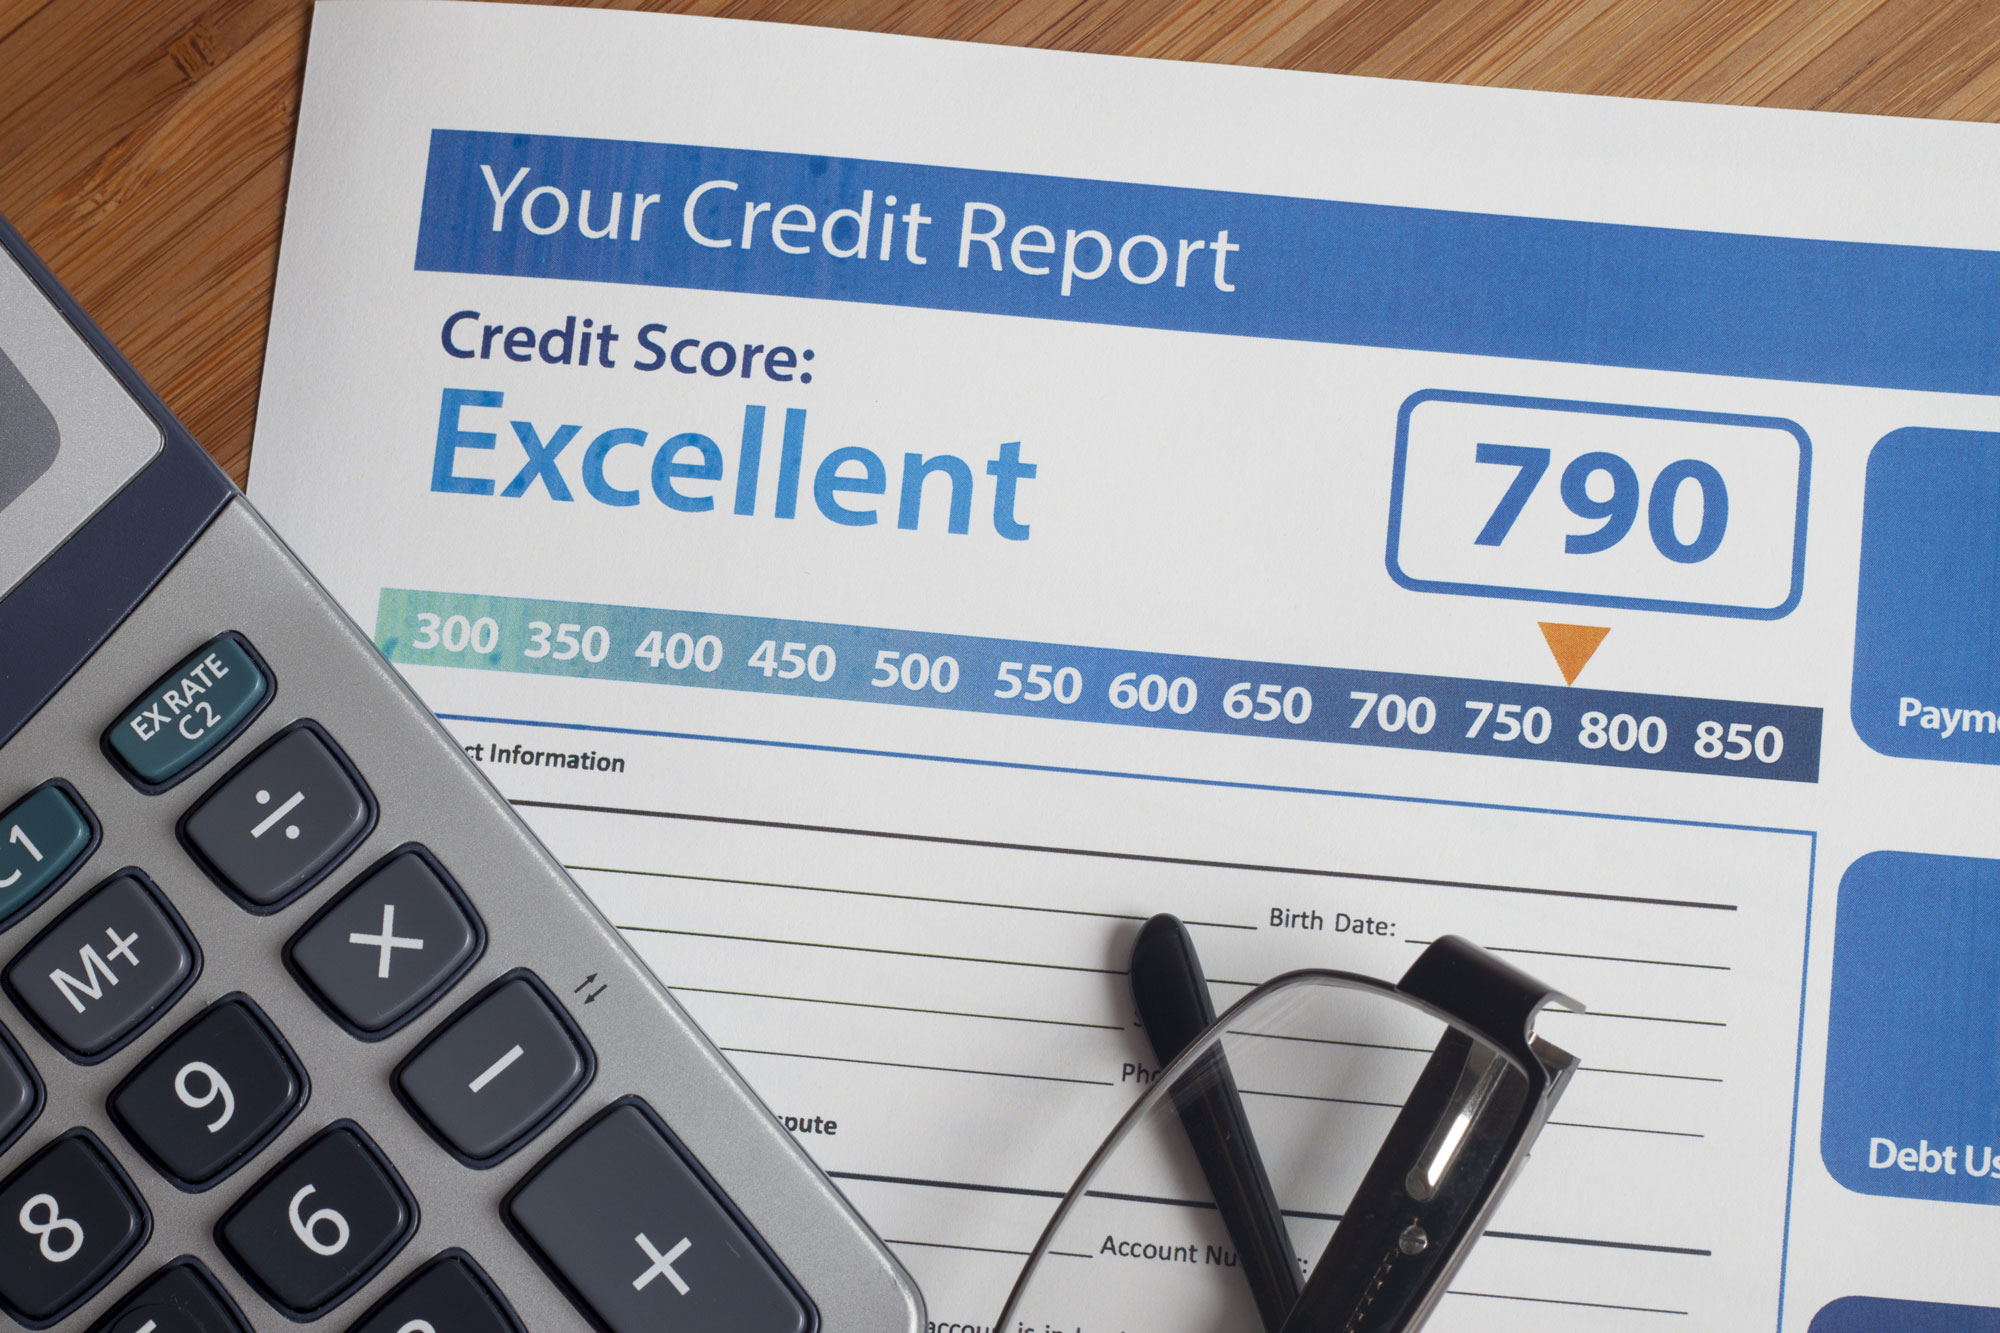 Credit solutions for professional practices